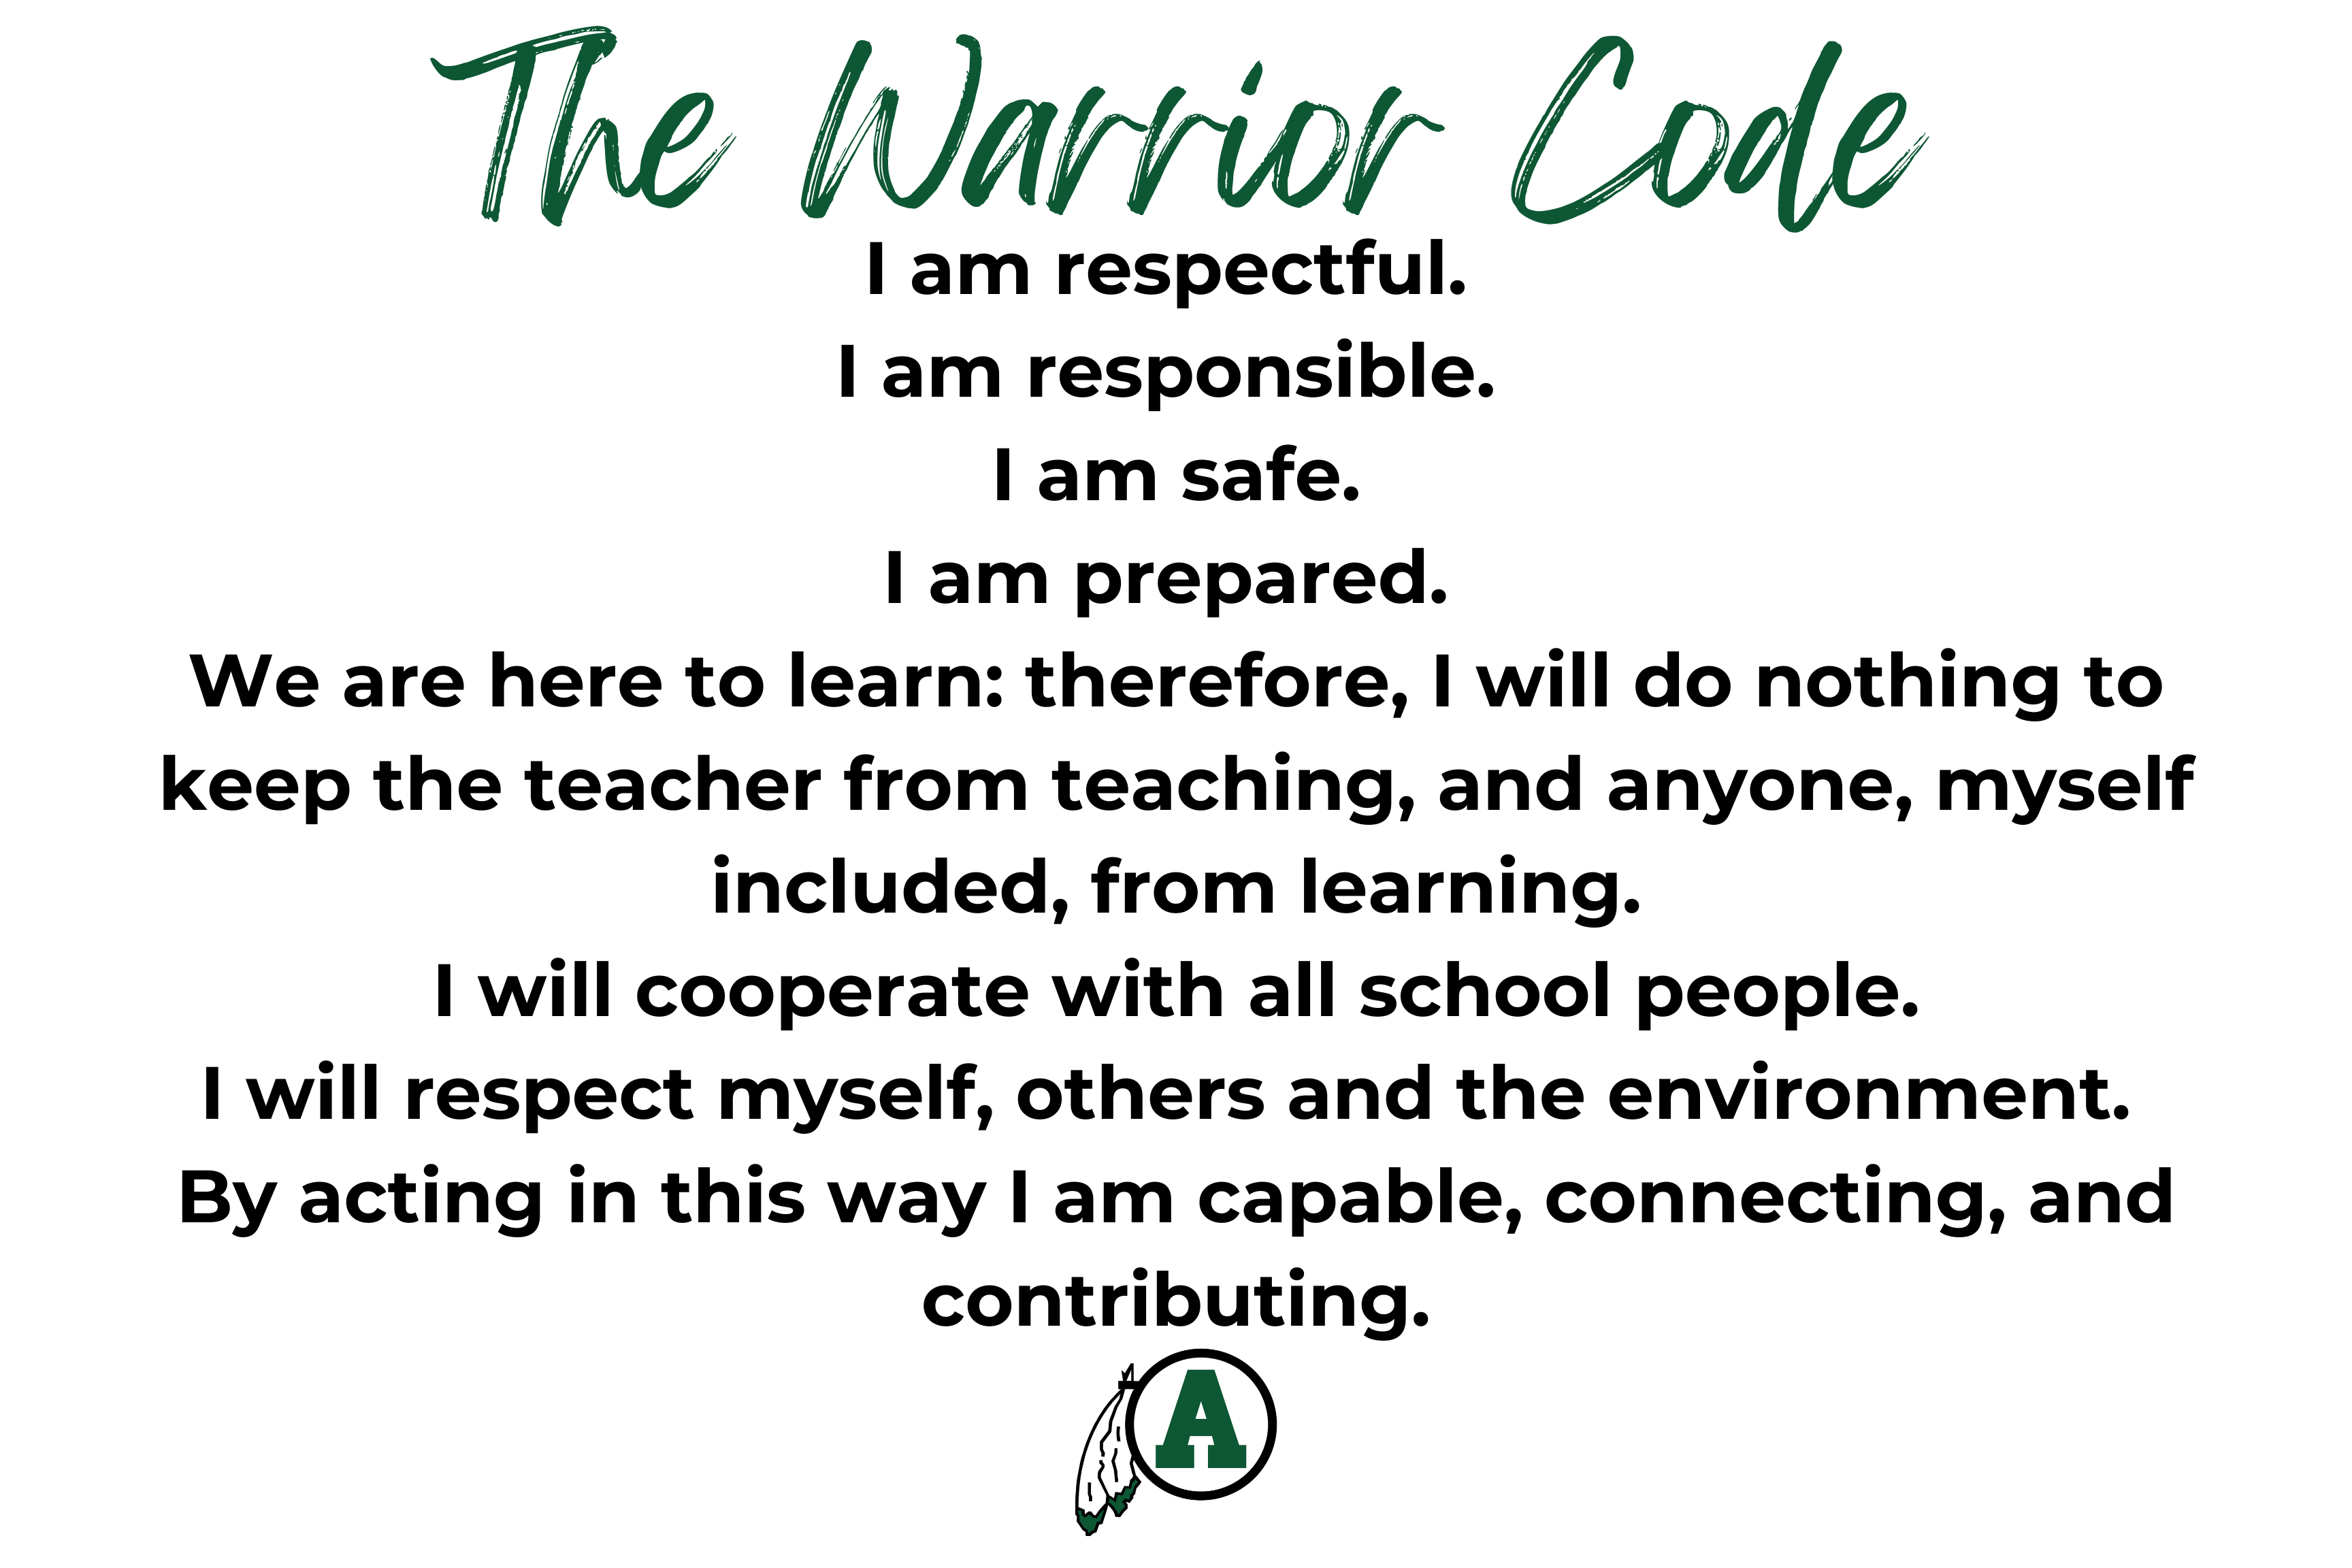 The Warrior Code, I am respectful, I am responsible, I am safe, I am prepared. We are here to learn: therefore, I will do nothing to keep the teacher from teaching, and anyone, myself included, from learning. I will cooperate with all school people. I will respect myself, others and the environment. By acting in this way I am capable, connecting, and contributing. 